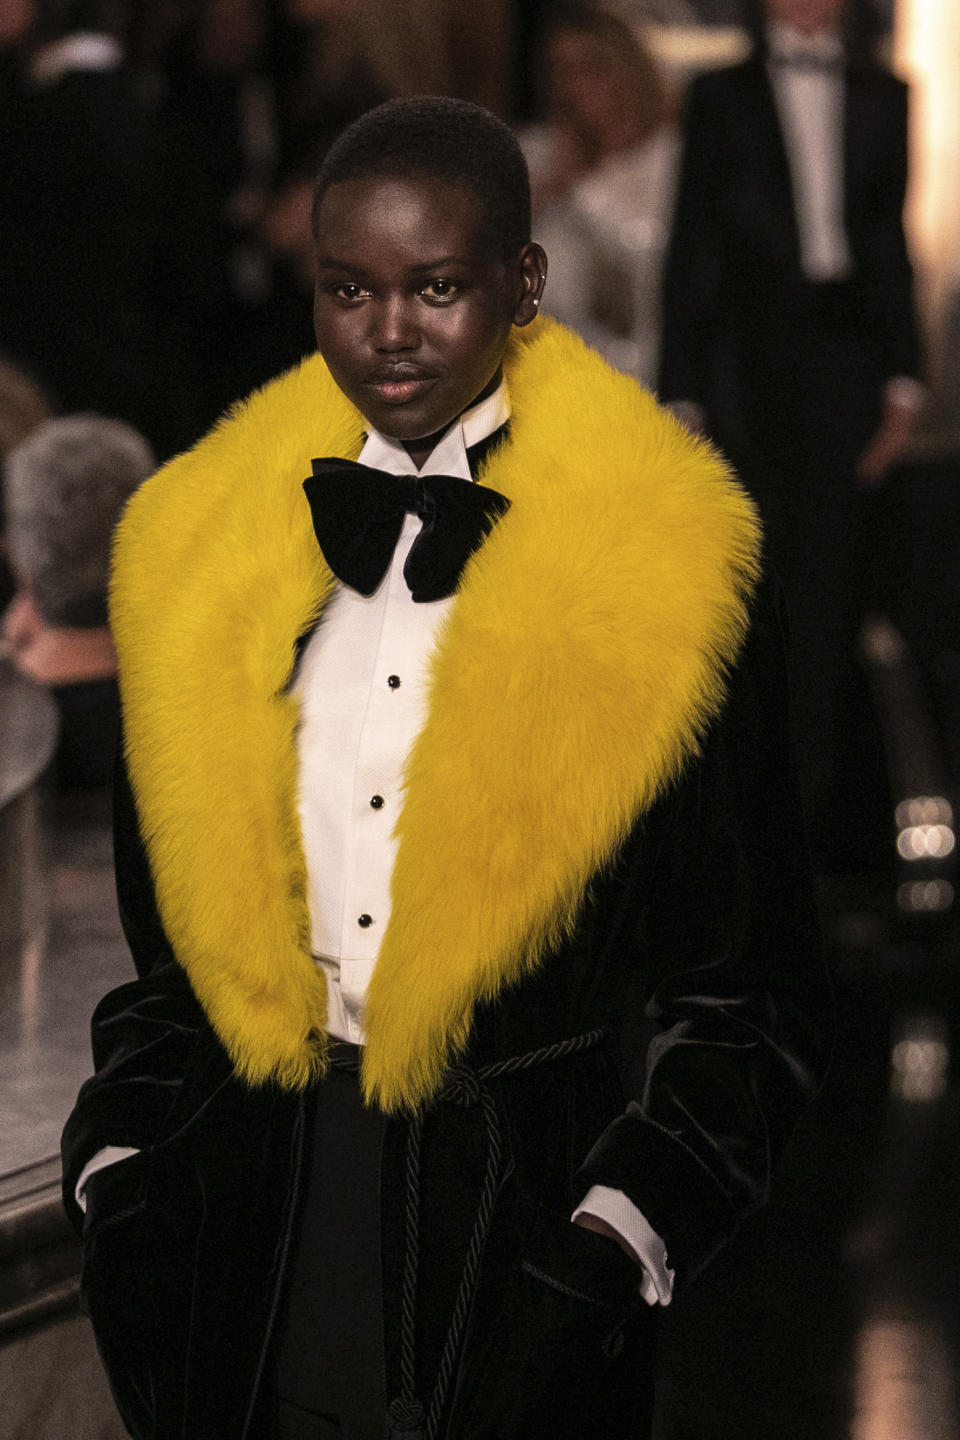 The Ralph Lauren collection is modeled during Fashion Week in New York, Saturday, Sept. 7, 2019. (AP Photo/Jeenah Moon)